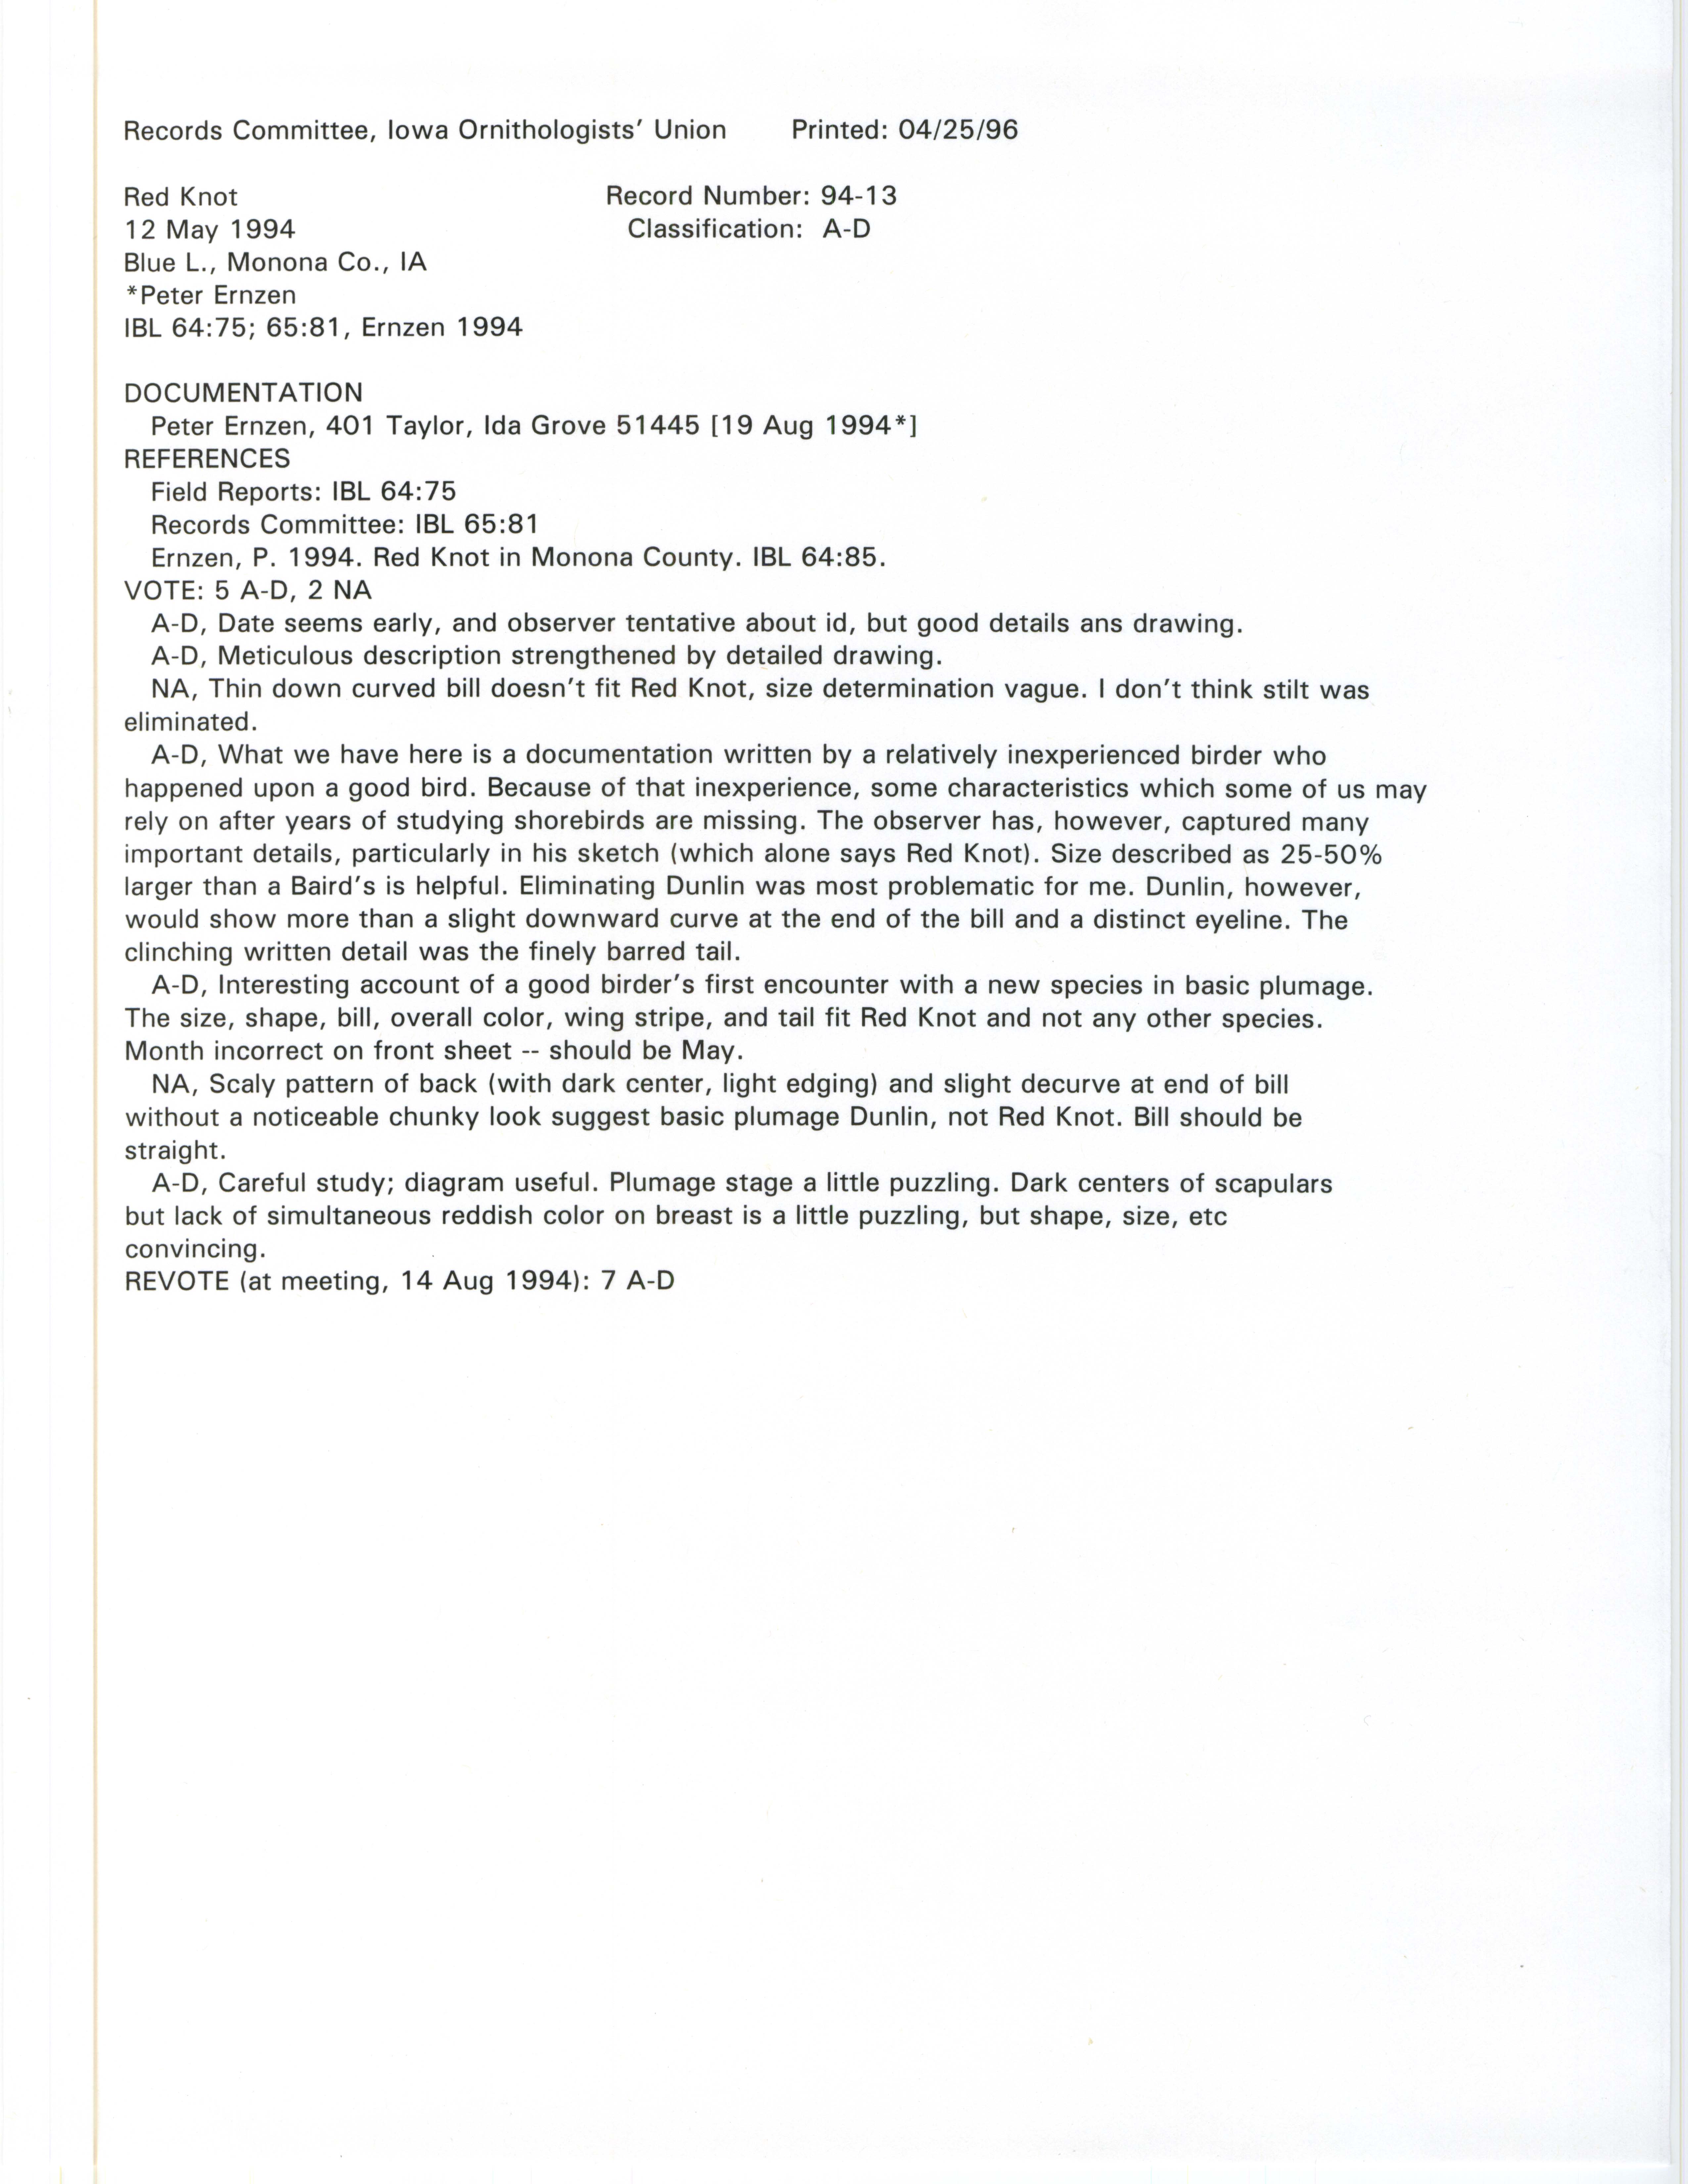 Records Committee review for rare bird sighting of Red Knot at Blue Lake, 1994